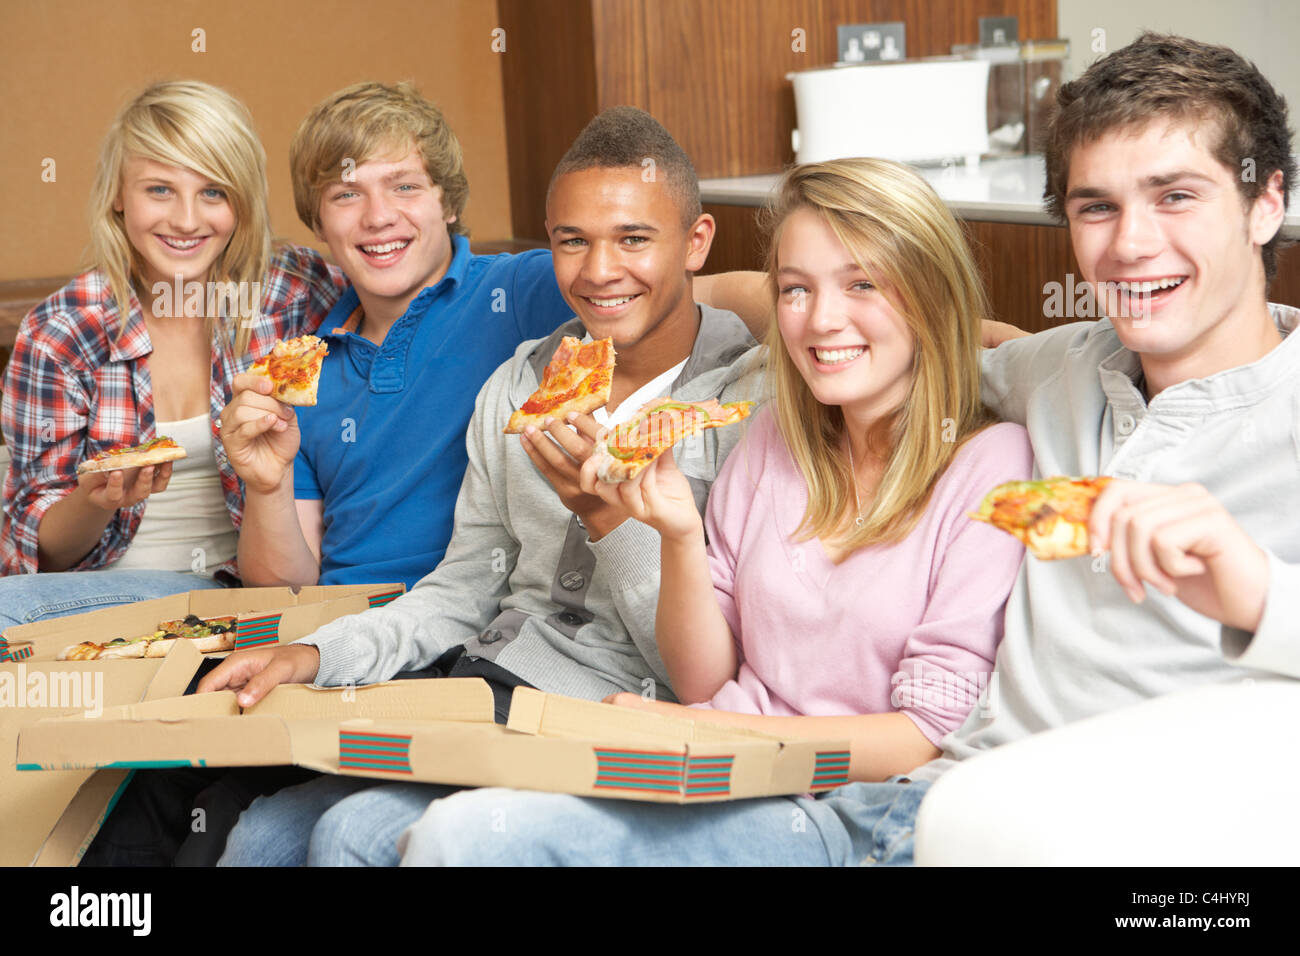 Group Of Teenage Friends Sitting On Sofa At Home Eating Pizza Stock Photo